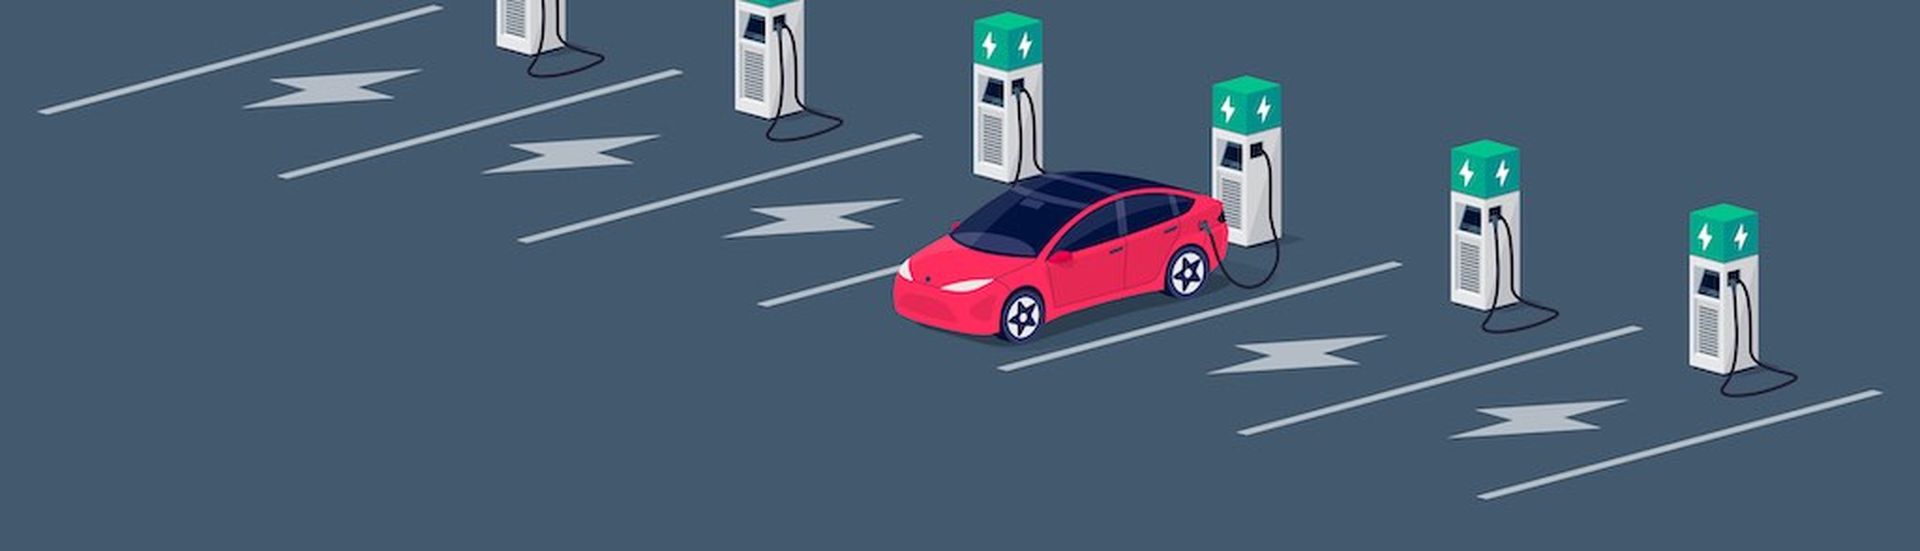 Electric car charging on empty parking lot area with fast supercharger station and many free charger stalls. Vehicle on electricity network grid. Isolated flat vector illustration on grey background.